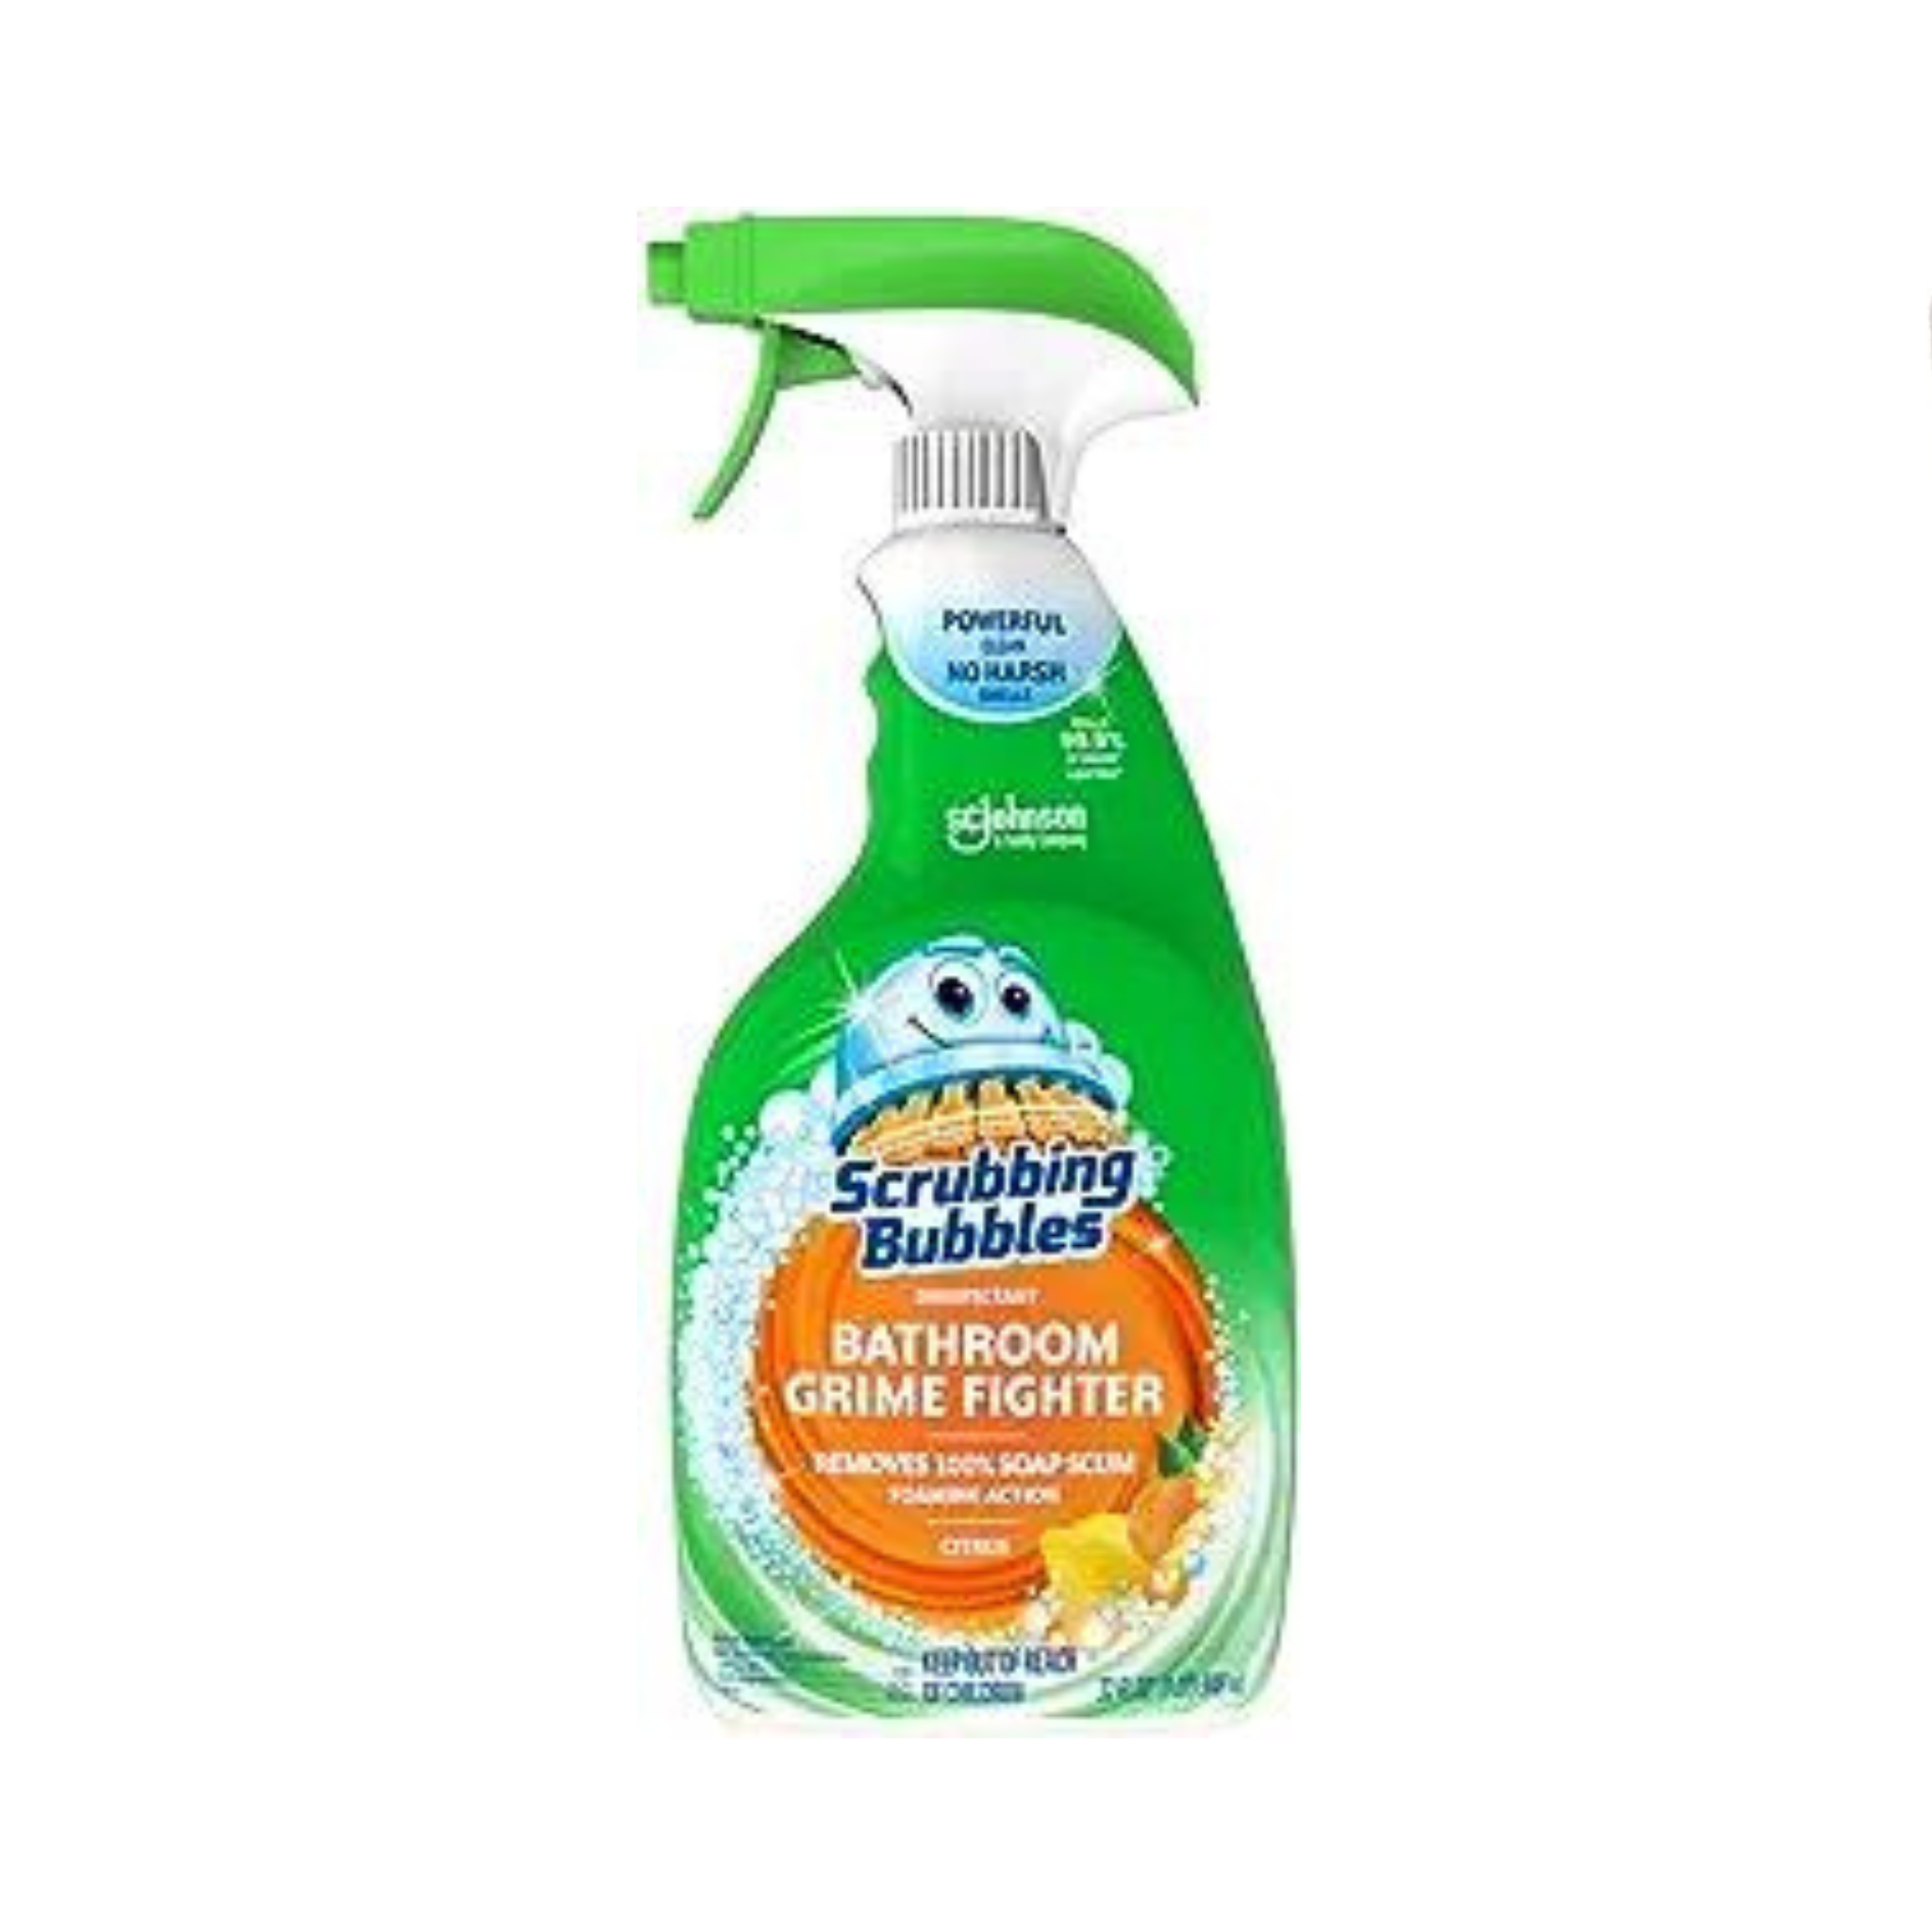 Get 2 Bottles Of Scrubbing Bubbles Disinfectant Bathroom Grime Fighter Spray